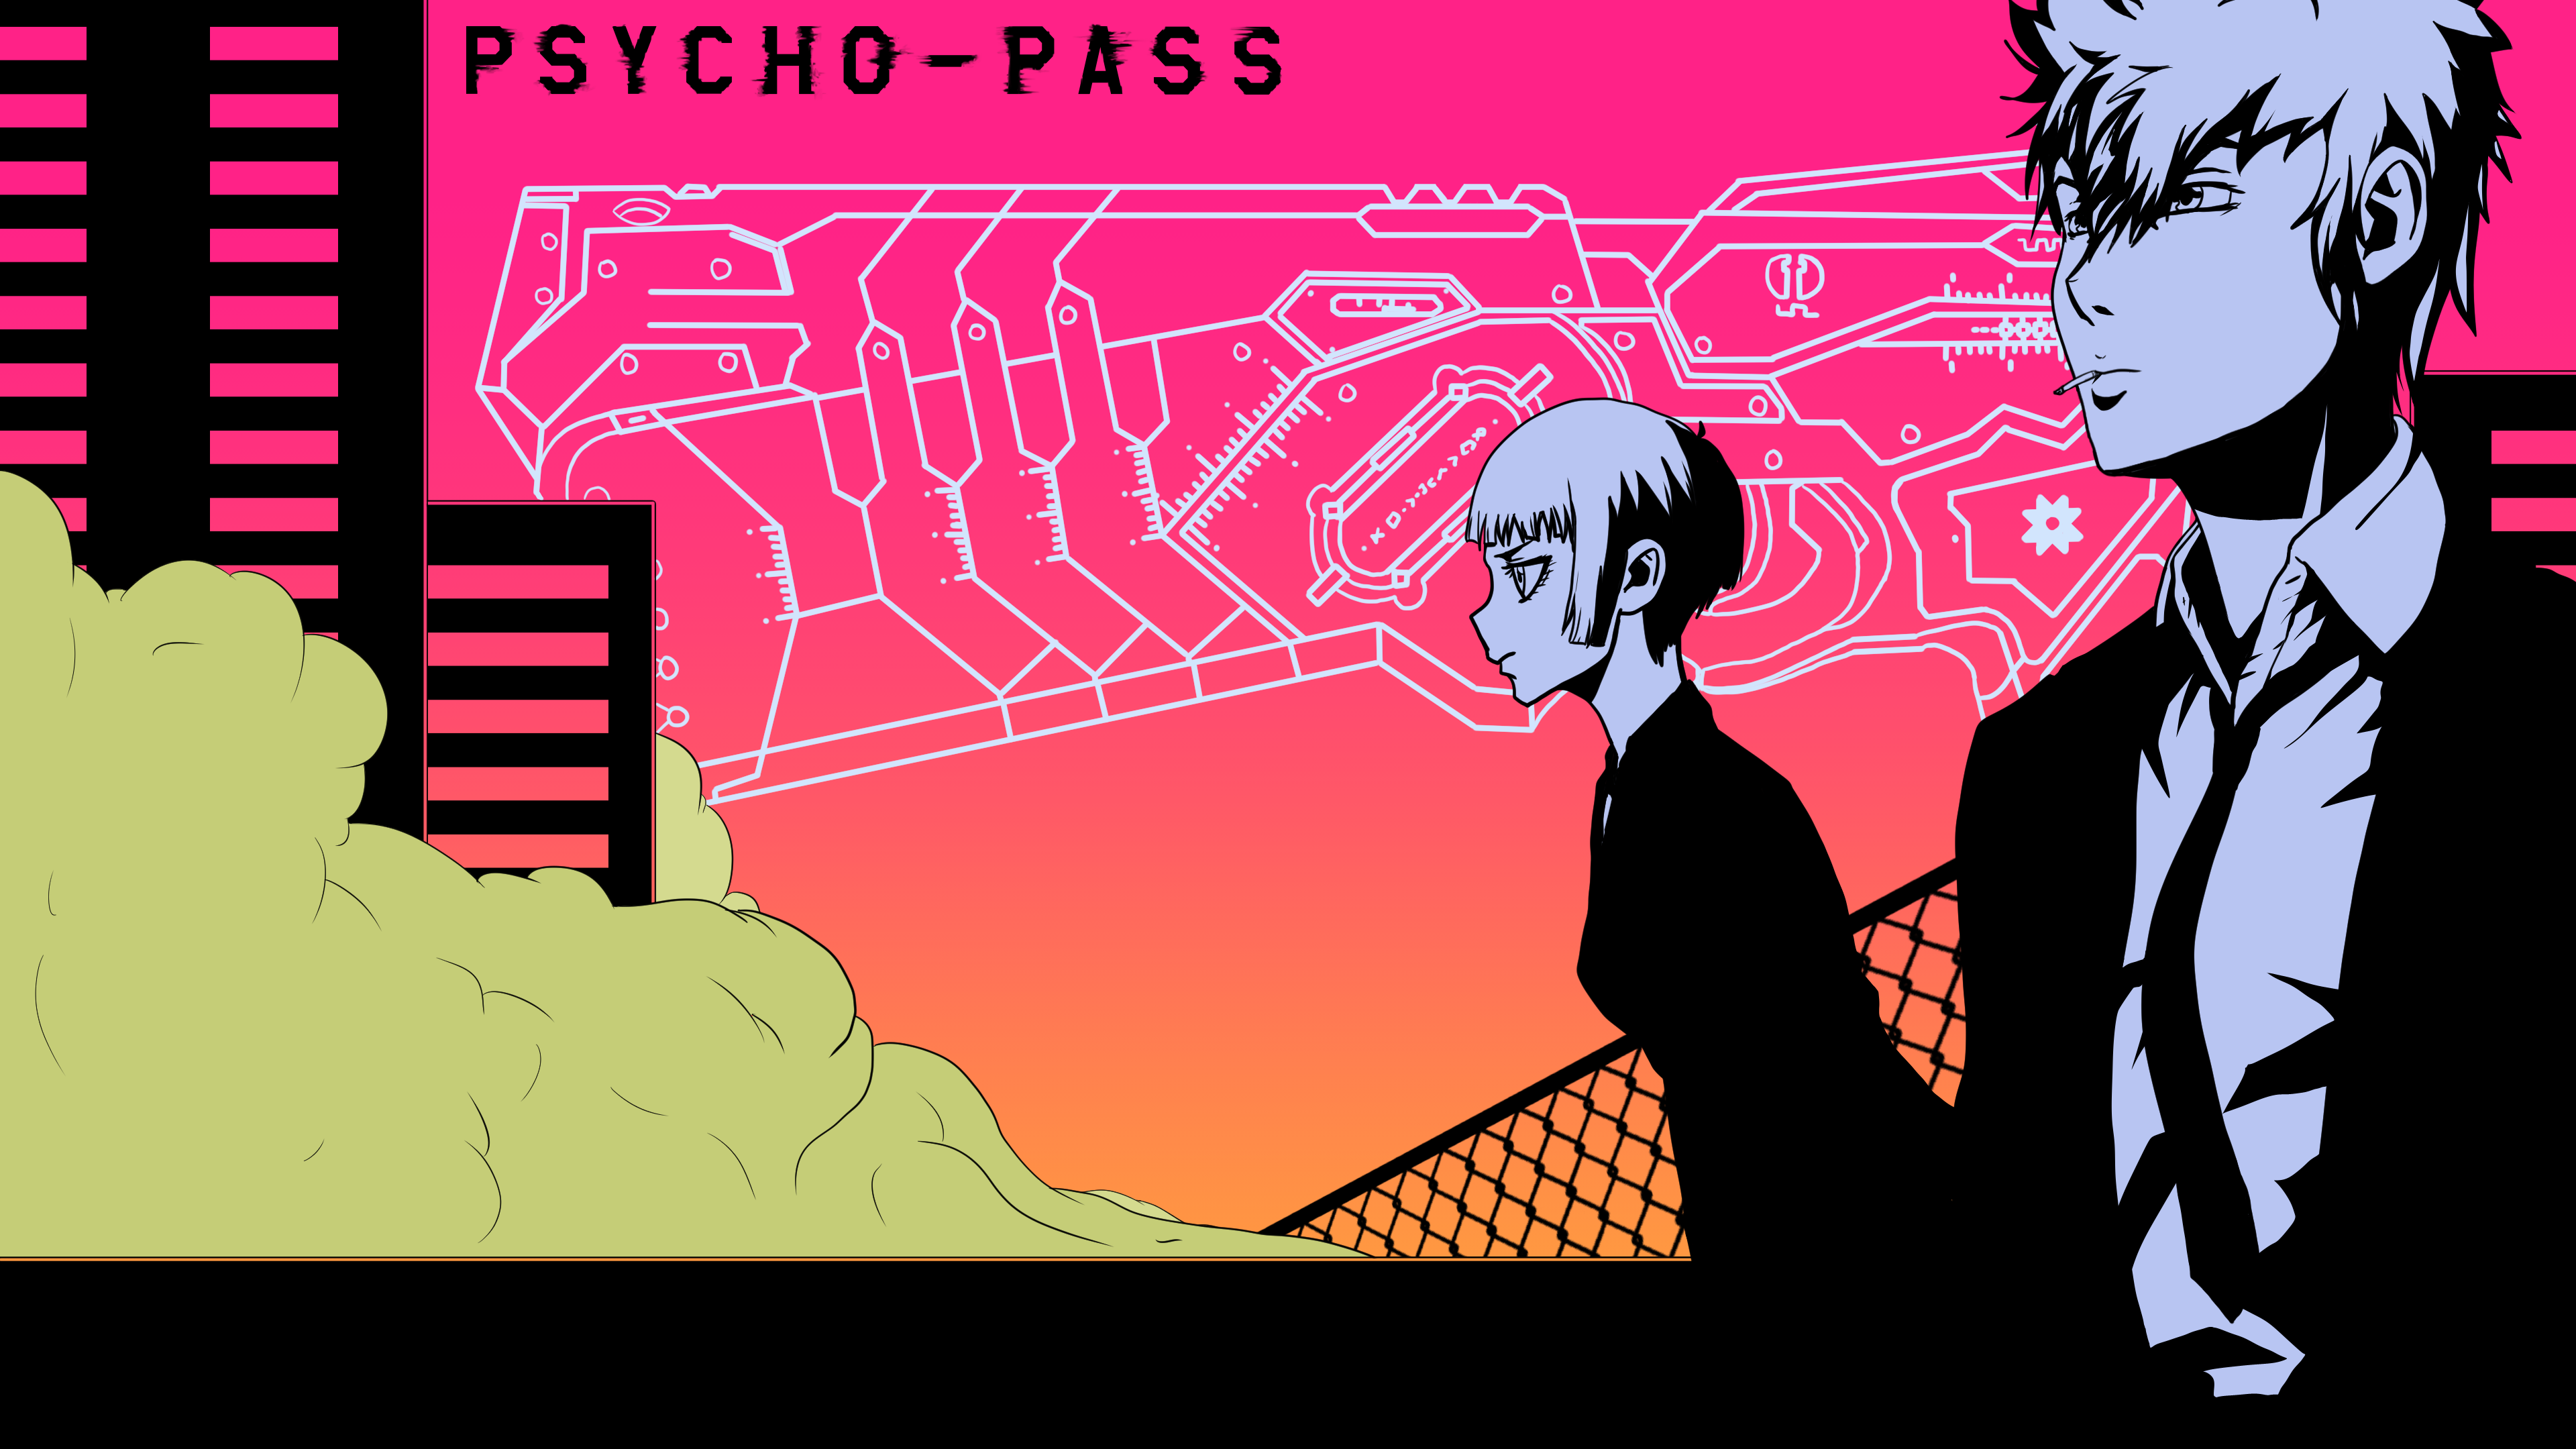 Drew A Psycho Pass Wallpaper For My Little Brothers Birthday